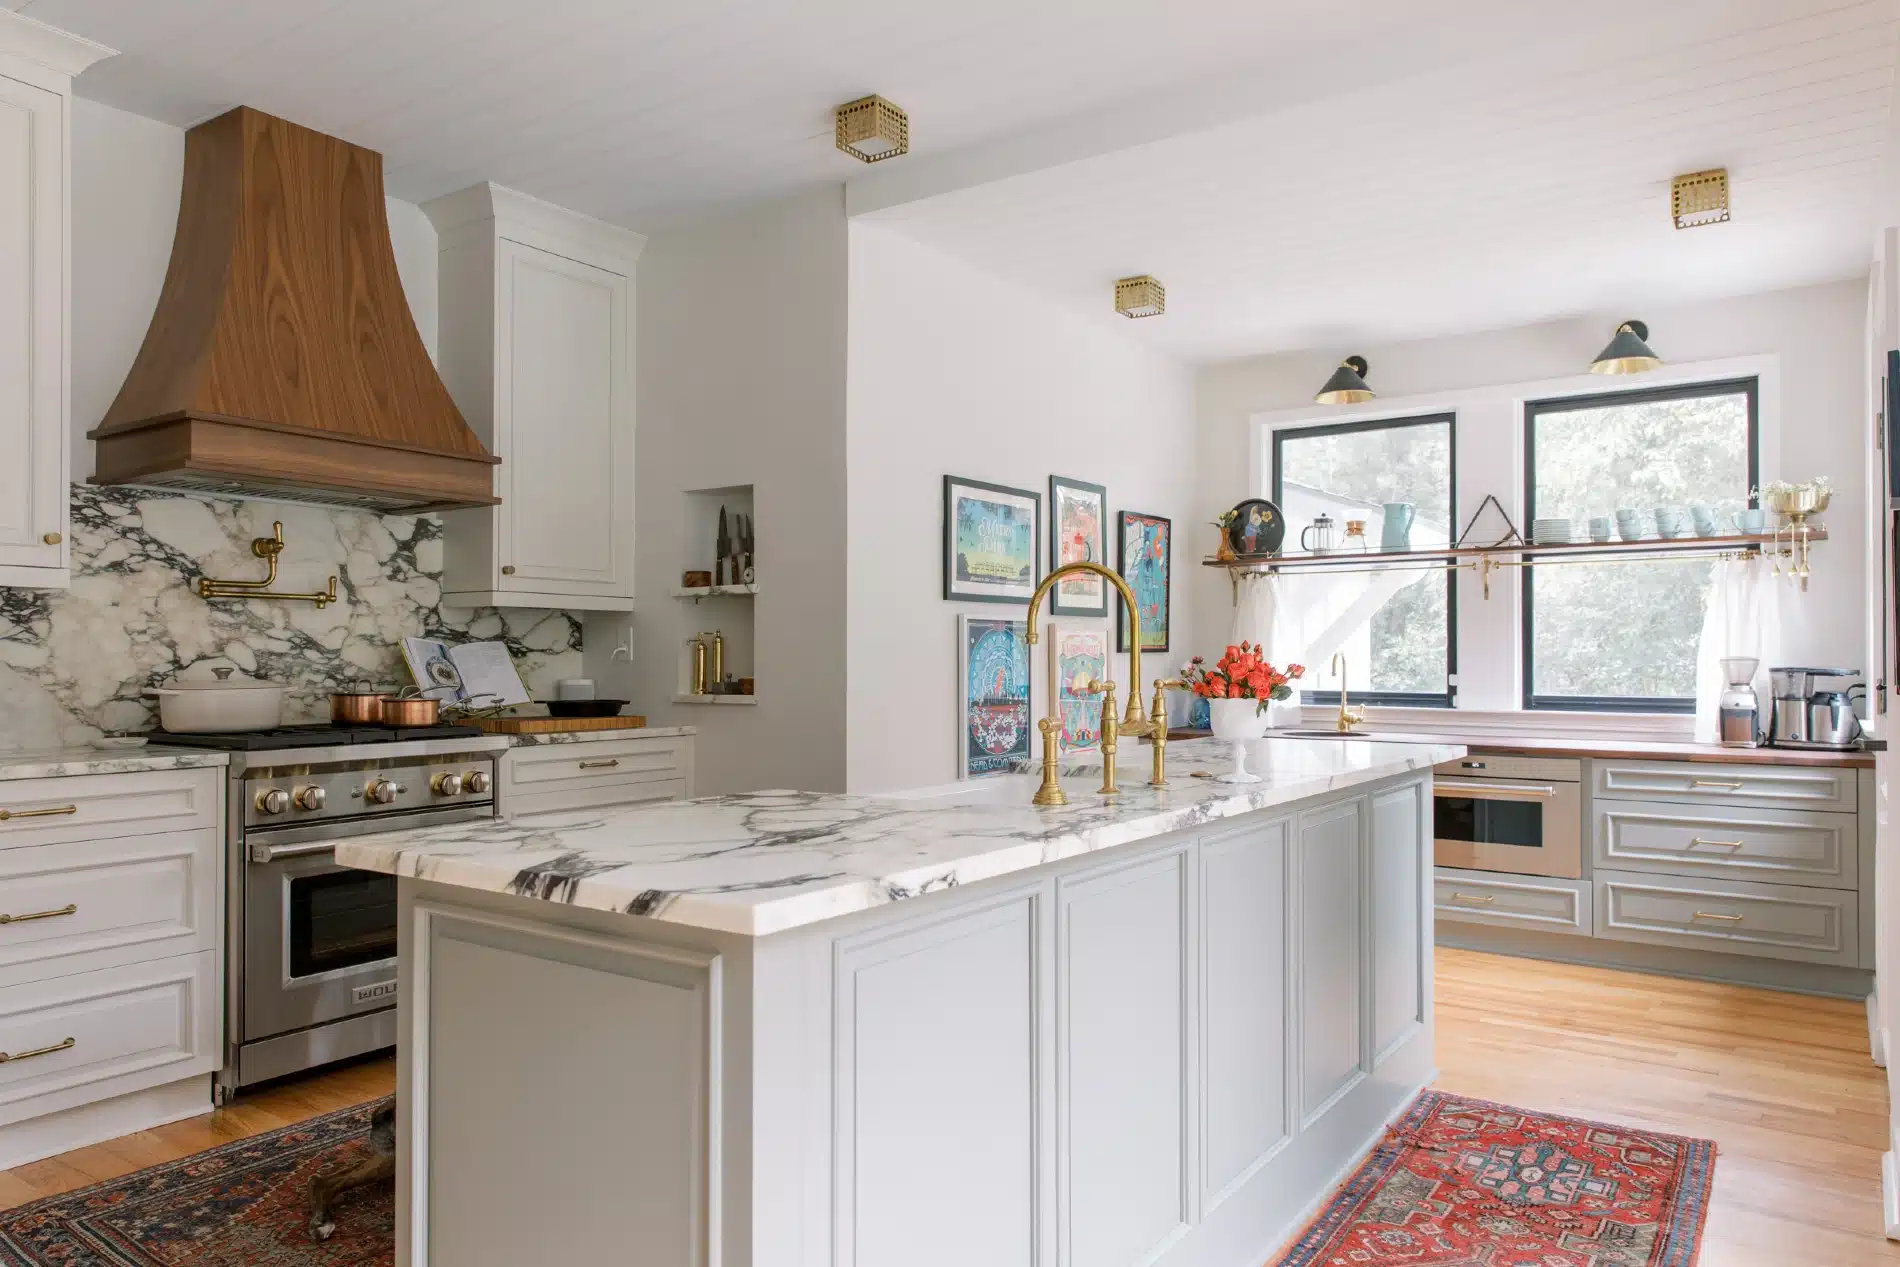 Chef's kitchen with walnut hood, marble counters and unlacquered brass fixtures